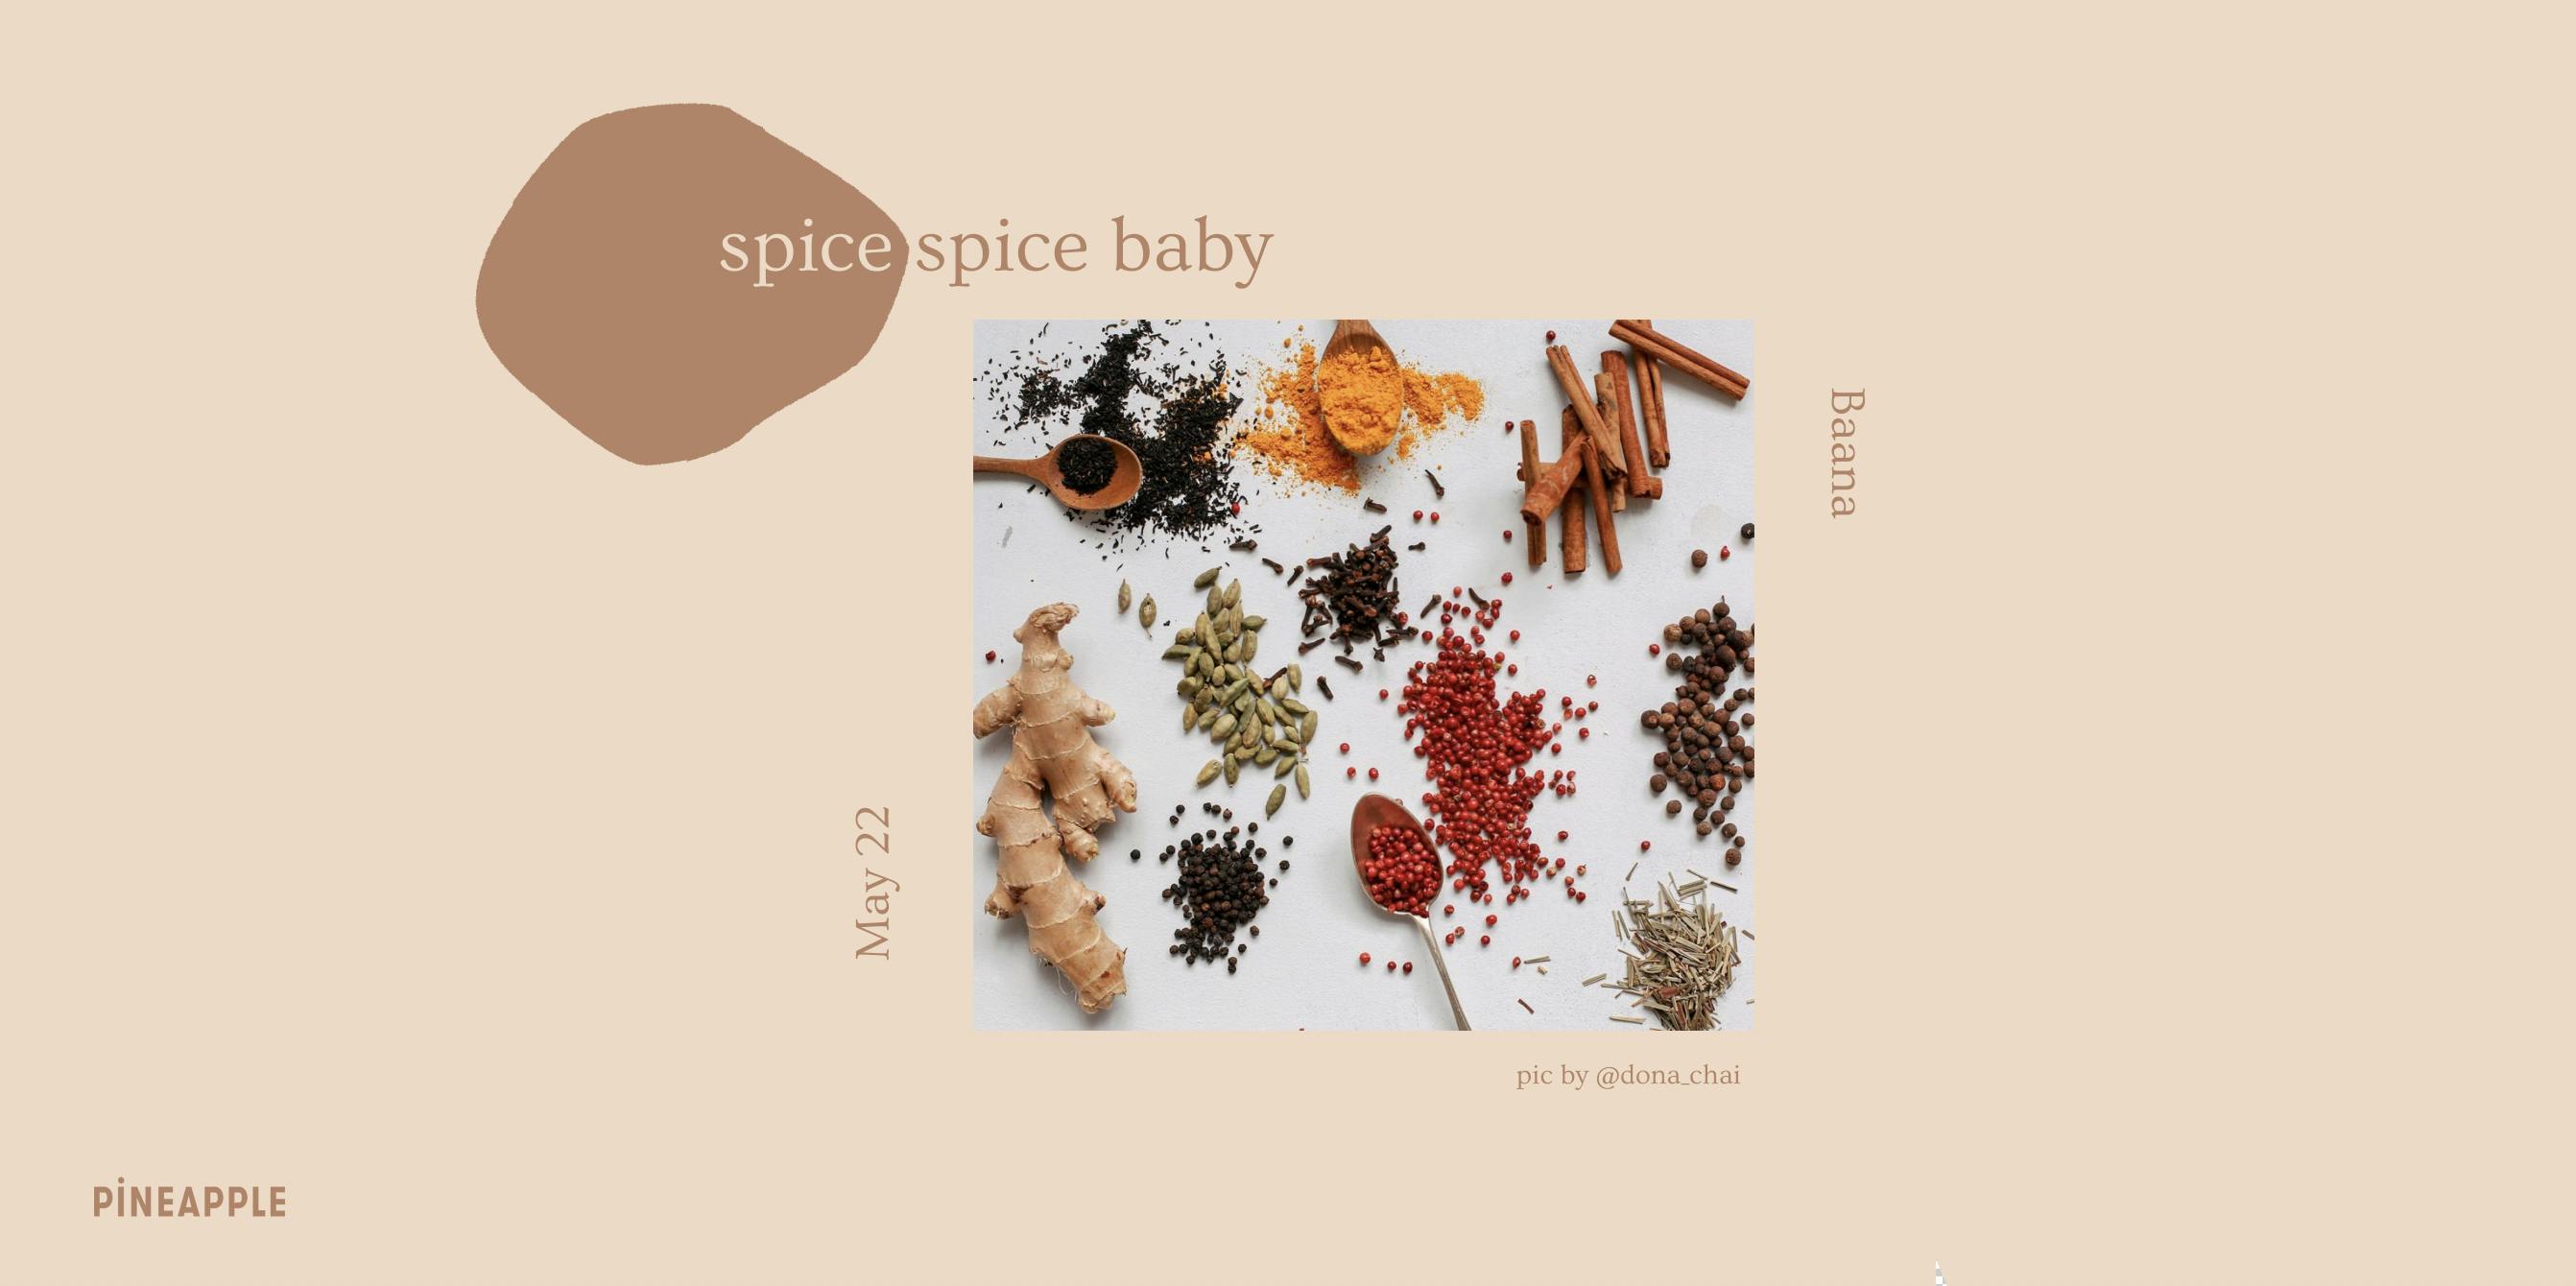 pineapple SF presents: spice spice baby